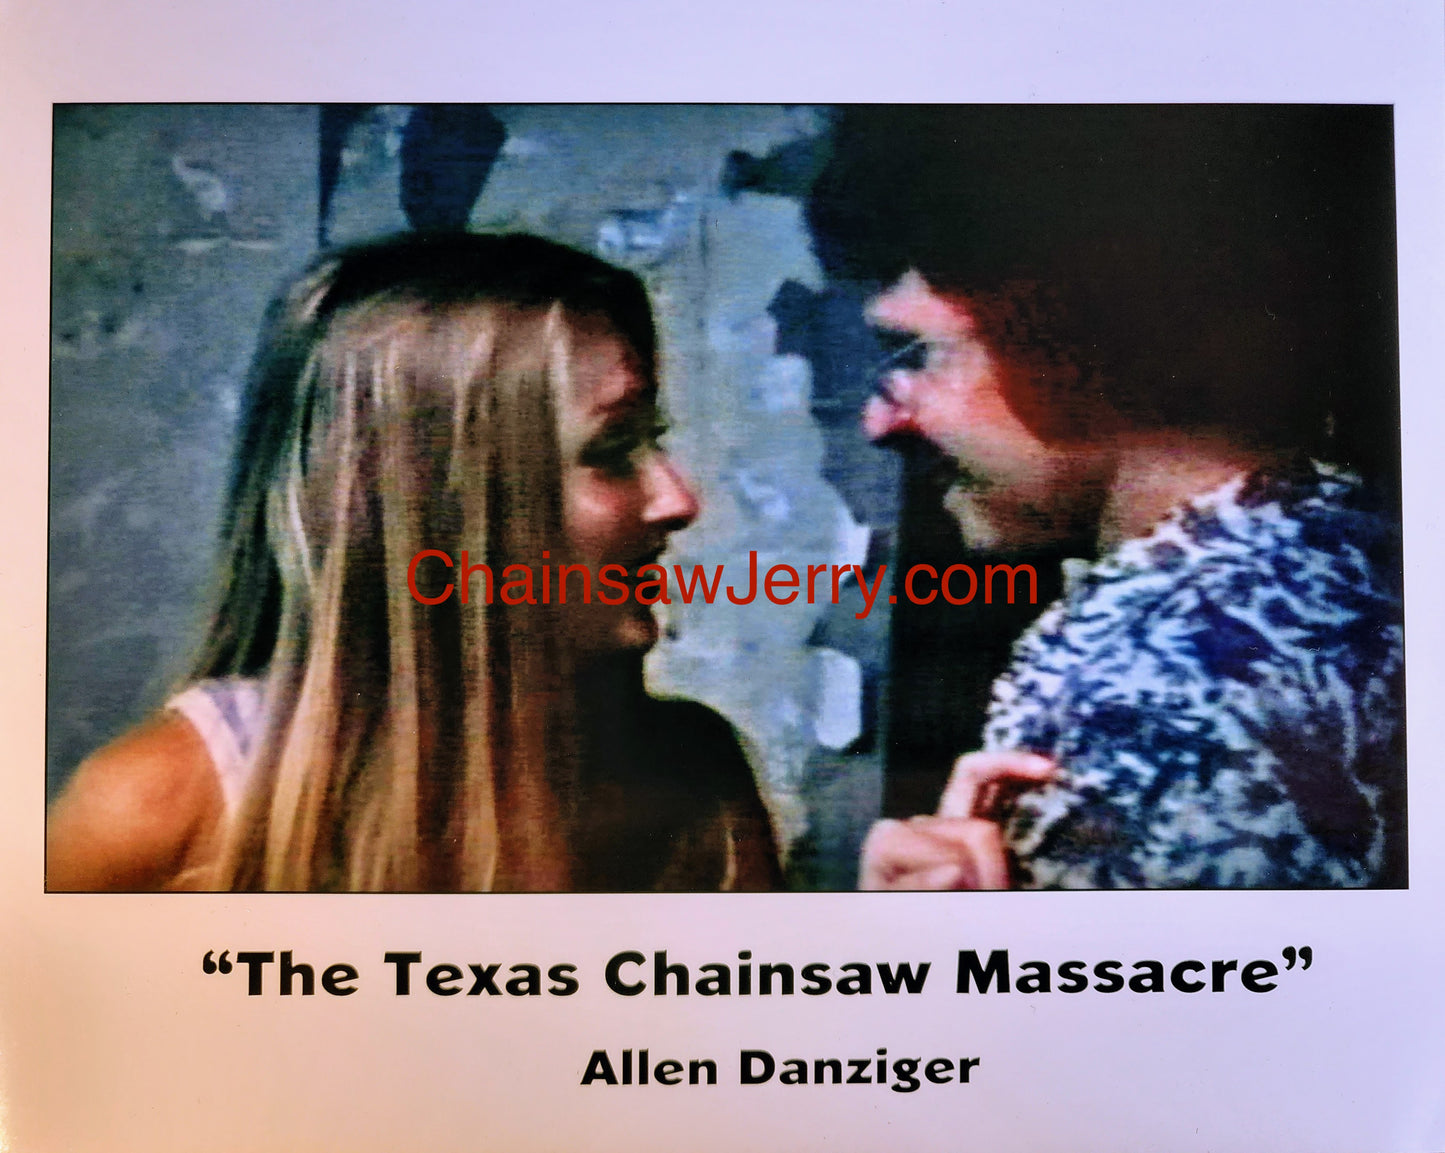 Texas Chainsaw Massacre "Jerry and Sally" Photo Signed by Allen Danziger